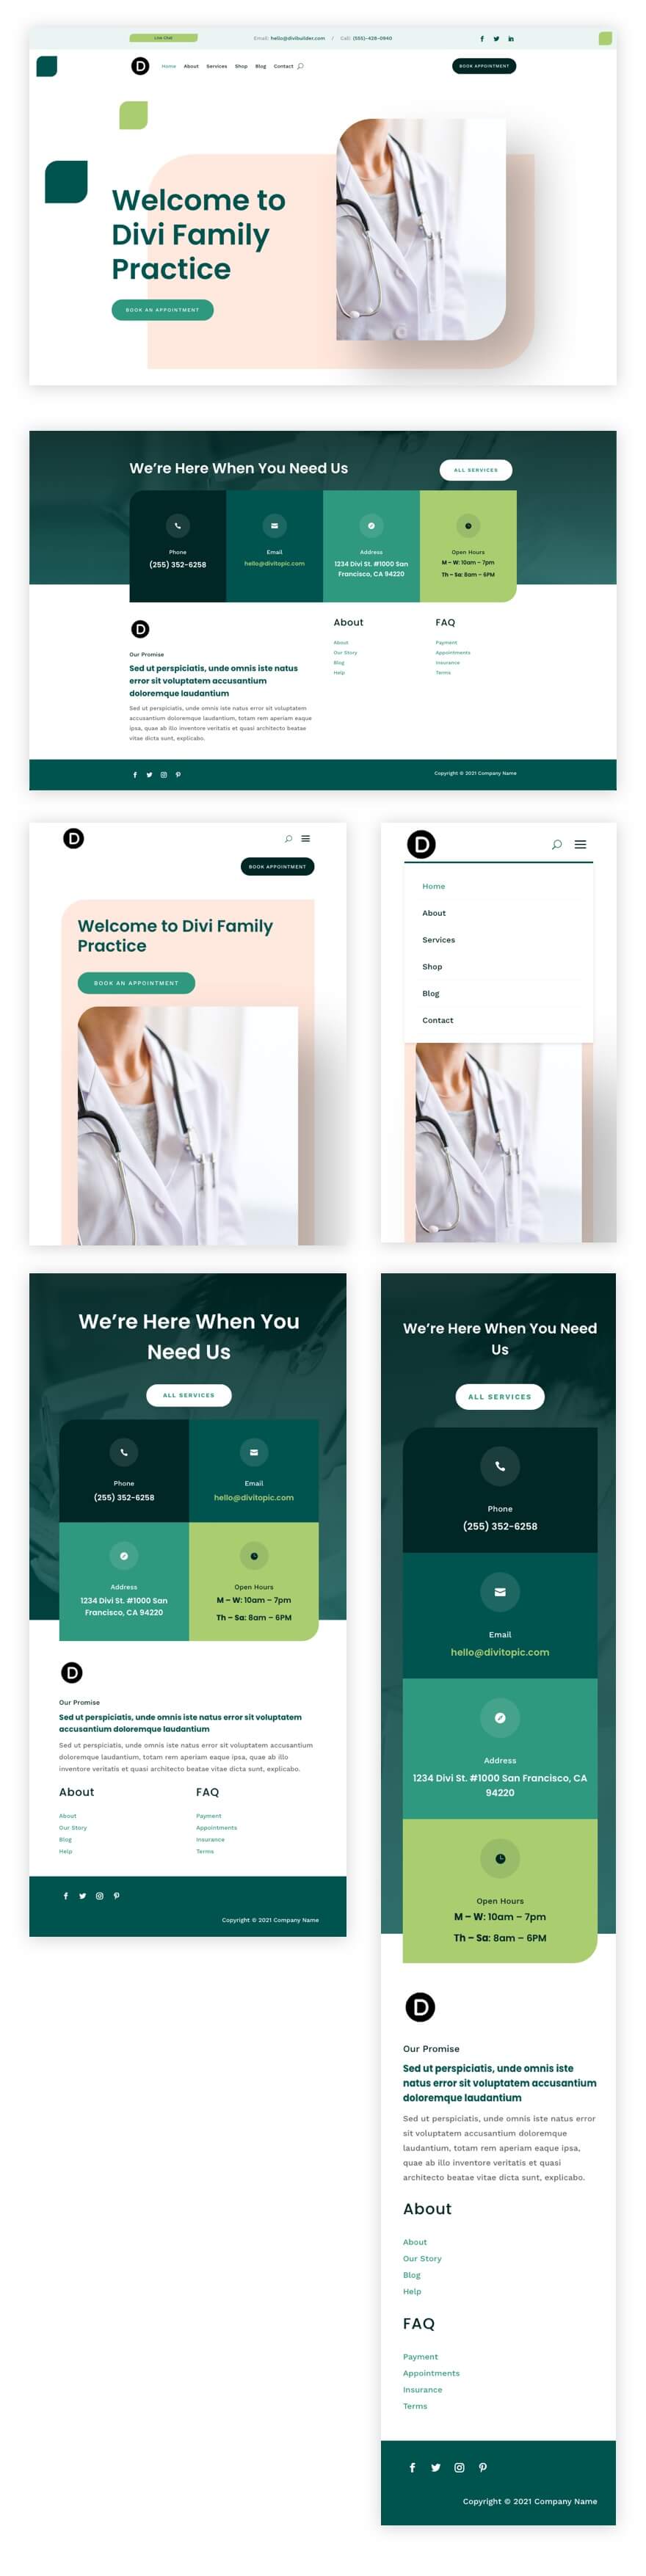 header footer template for Divi's Family Doctor Layout Pack